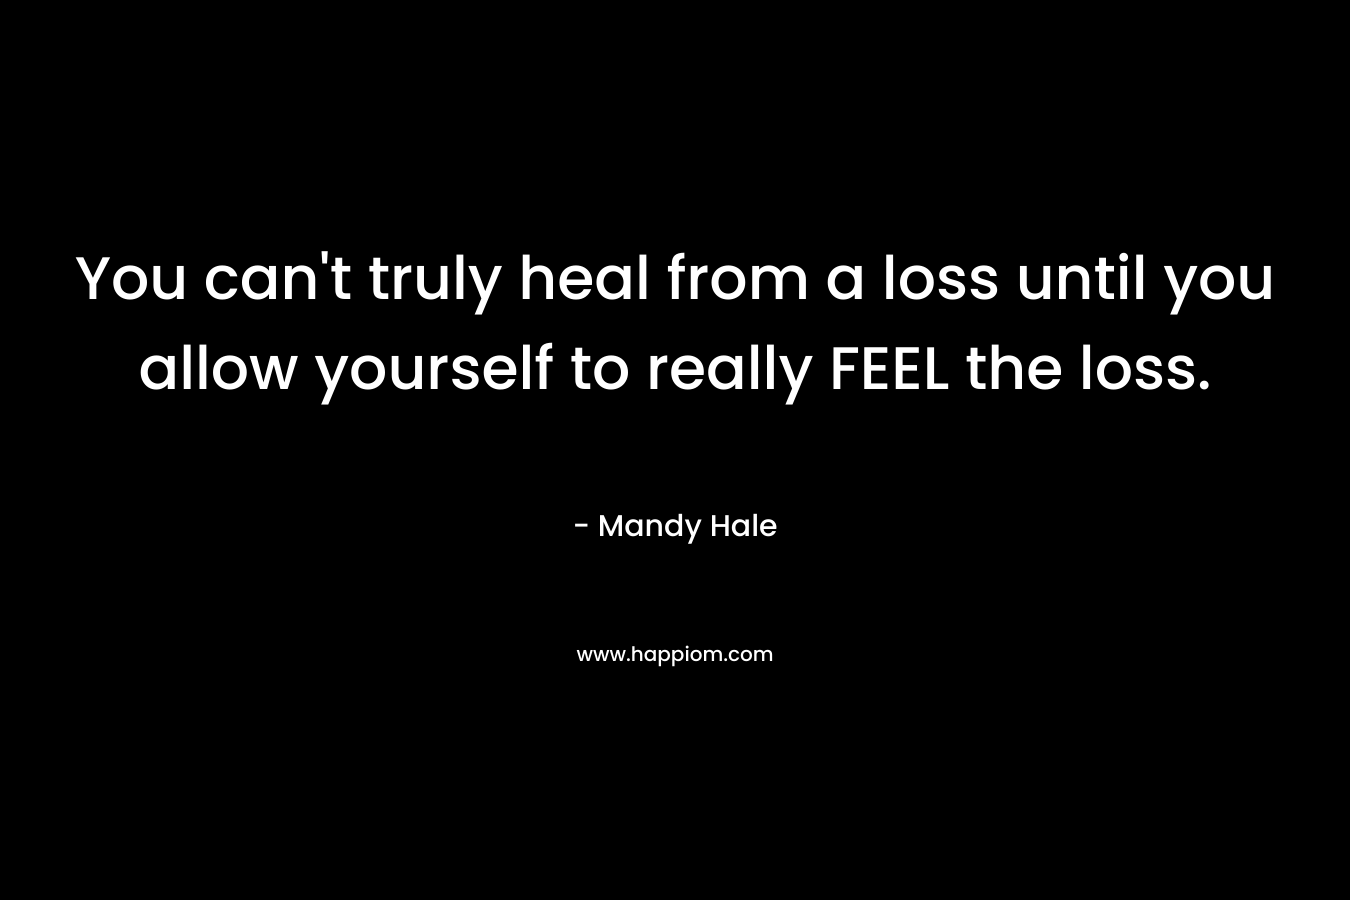 You can't truly heal from a loss until you allow yourself to really FEEL the loss.